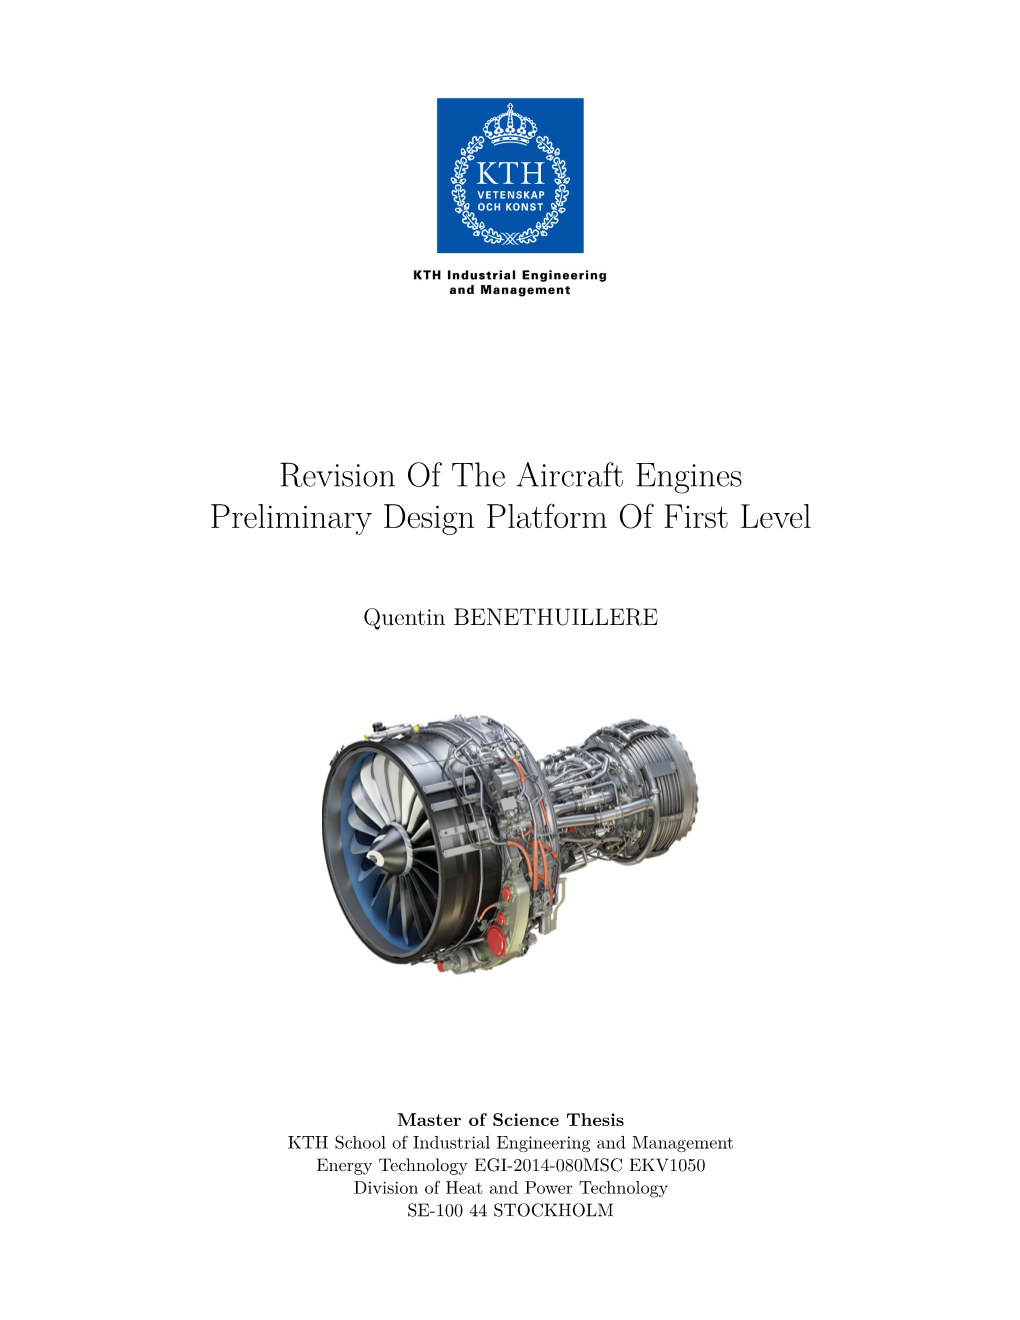 Revision of the Aircraft Engines Preliminary Design Platform of First Level